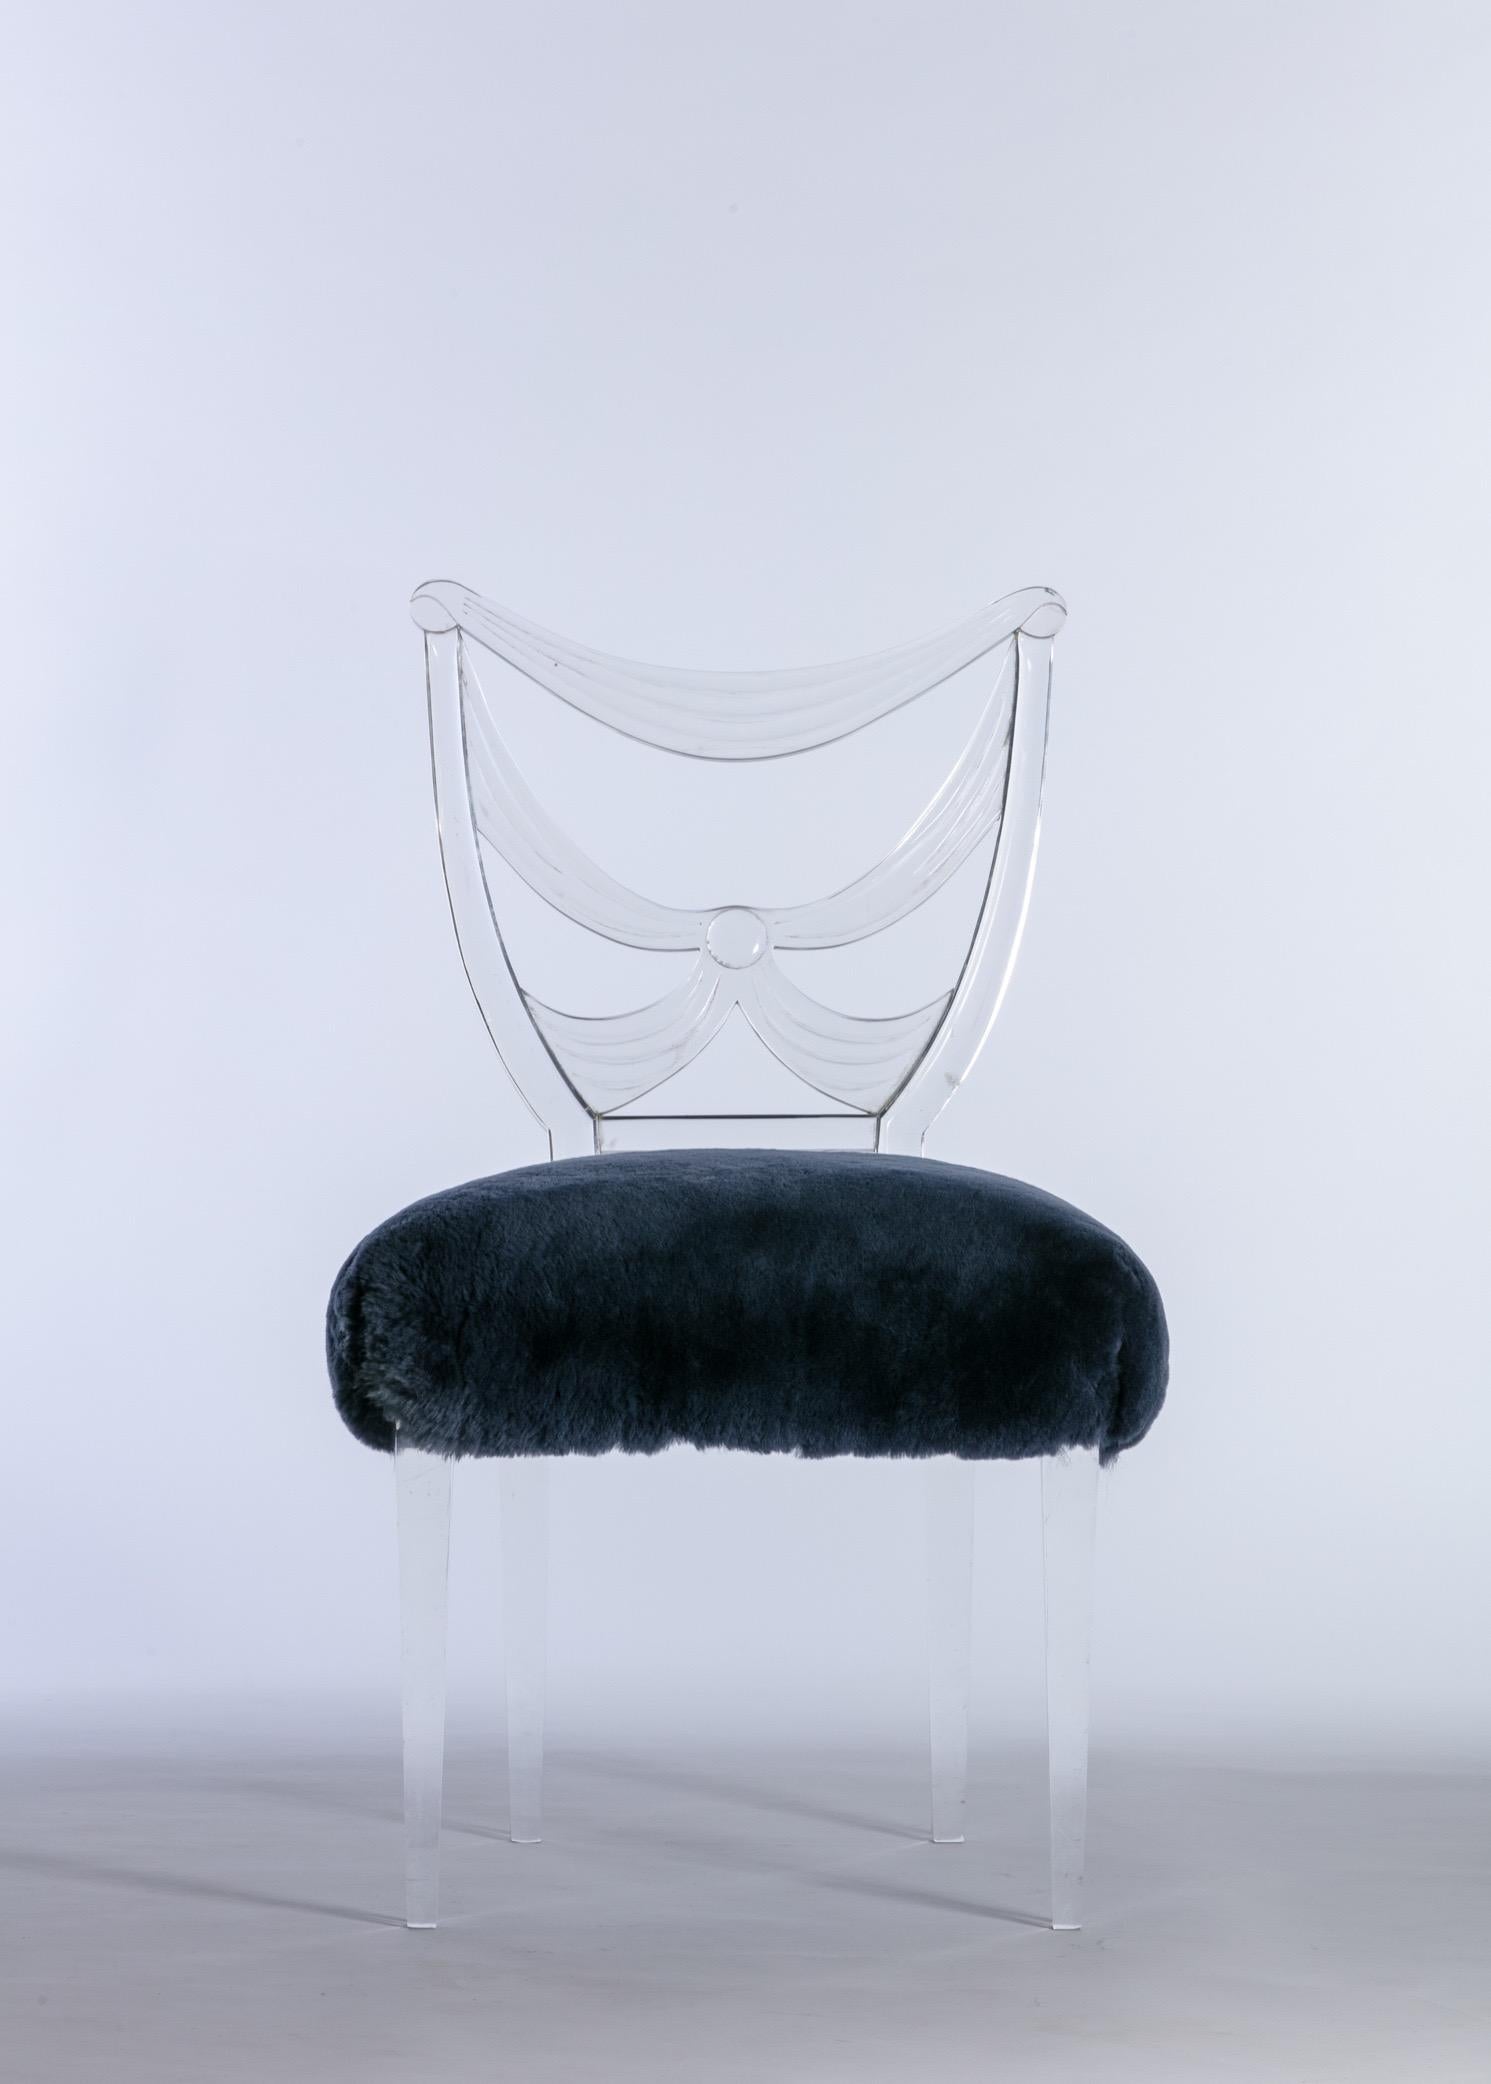 Grosfeld House Glassic collection drapery back Lucite side / desk / vanity chair with midnight blue shearling upholstery. Designed by Lorin Jackson, this collection debuted at the 1939 New York world’s fair. Karl Lagerfeld and Andy Warhol both had